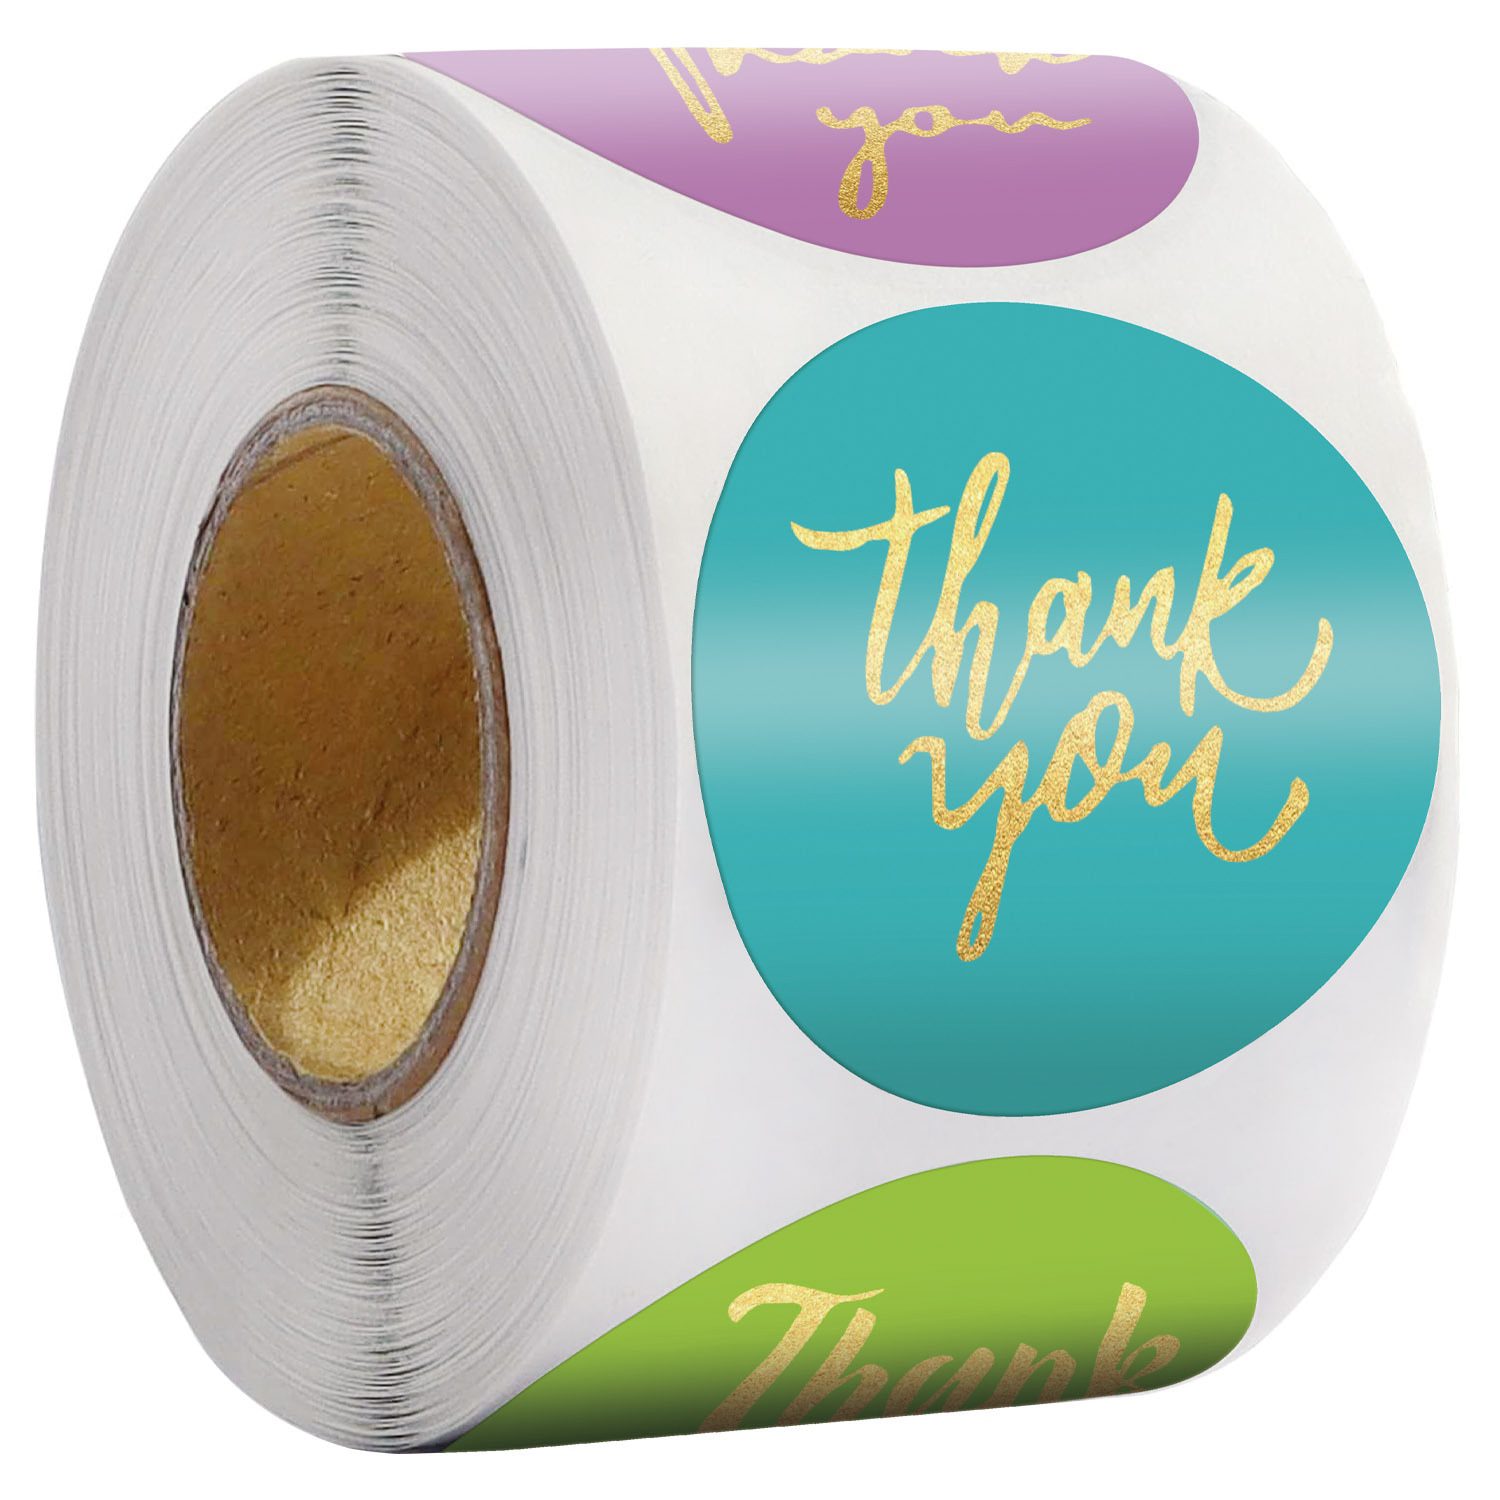 NEW Thank You Stickers Seal Labels 50-500PCS Gold Foil Paper Decoration Sticker For Handmade Wedding Gift Labels Stationery 4 Co